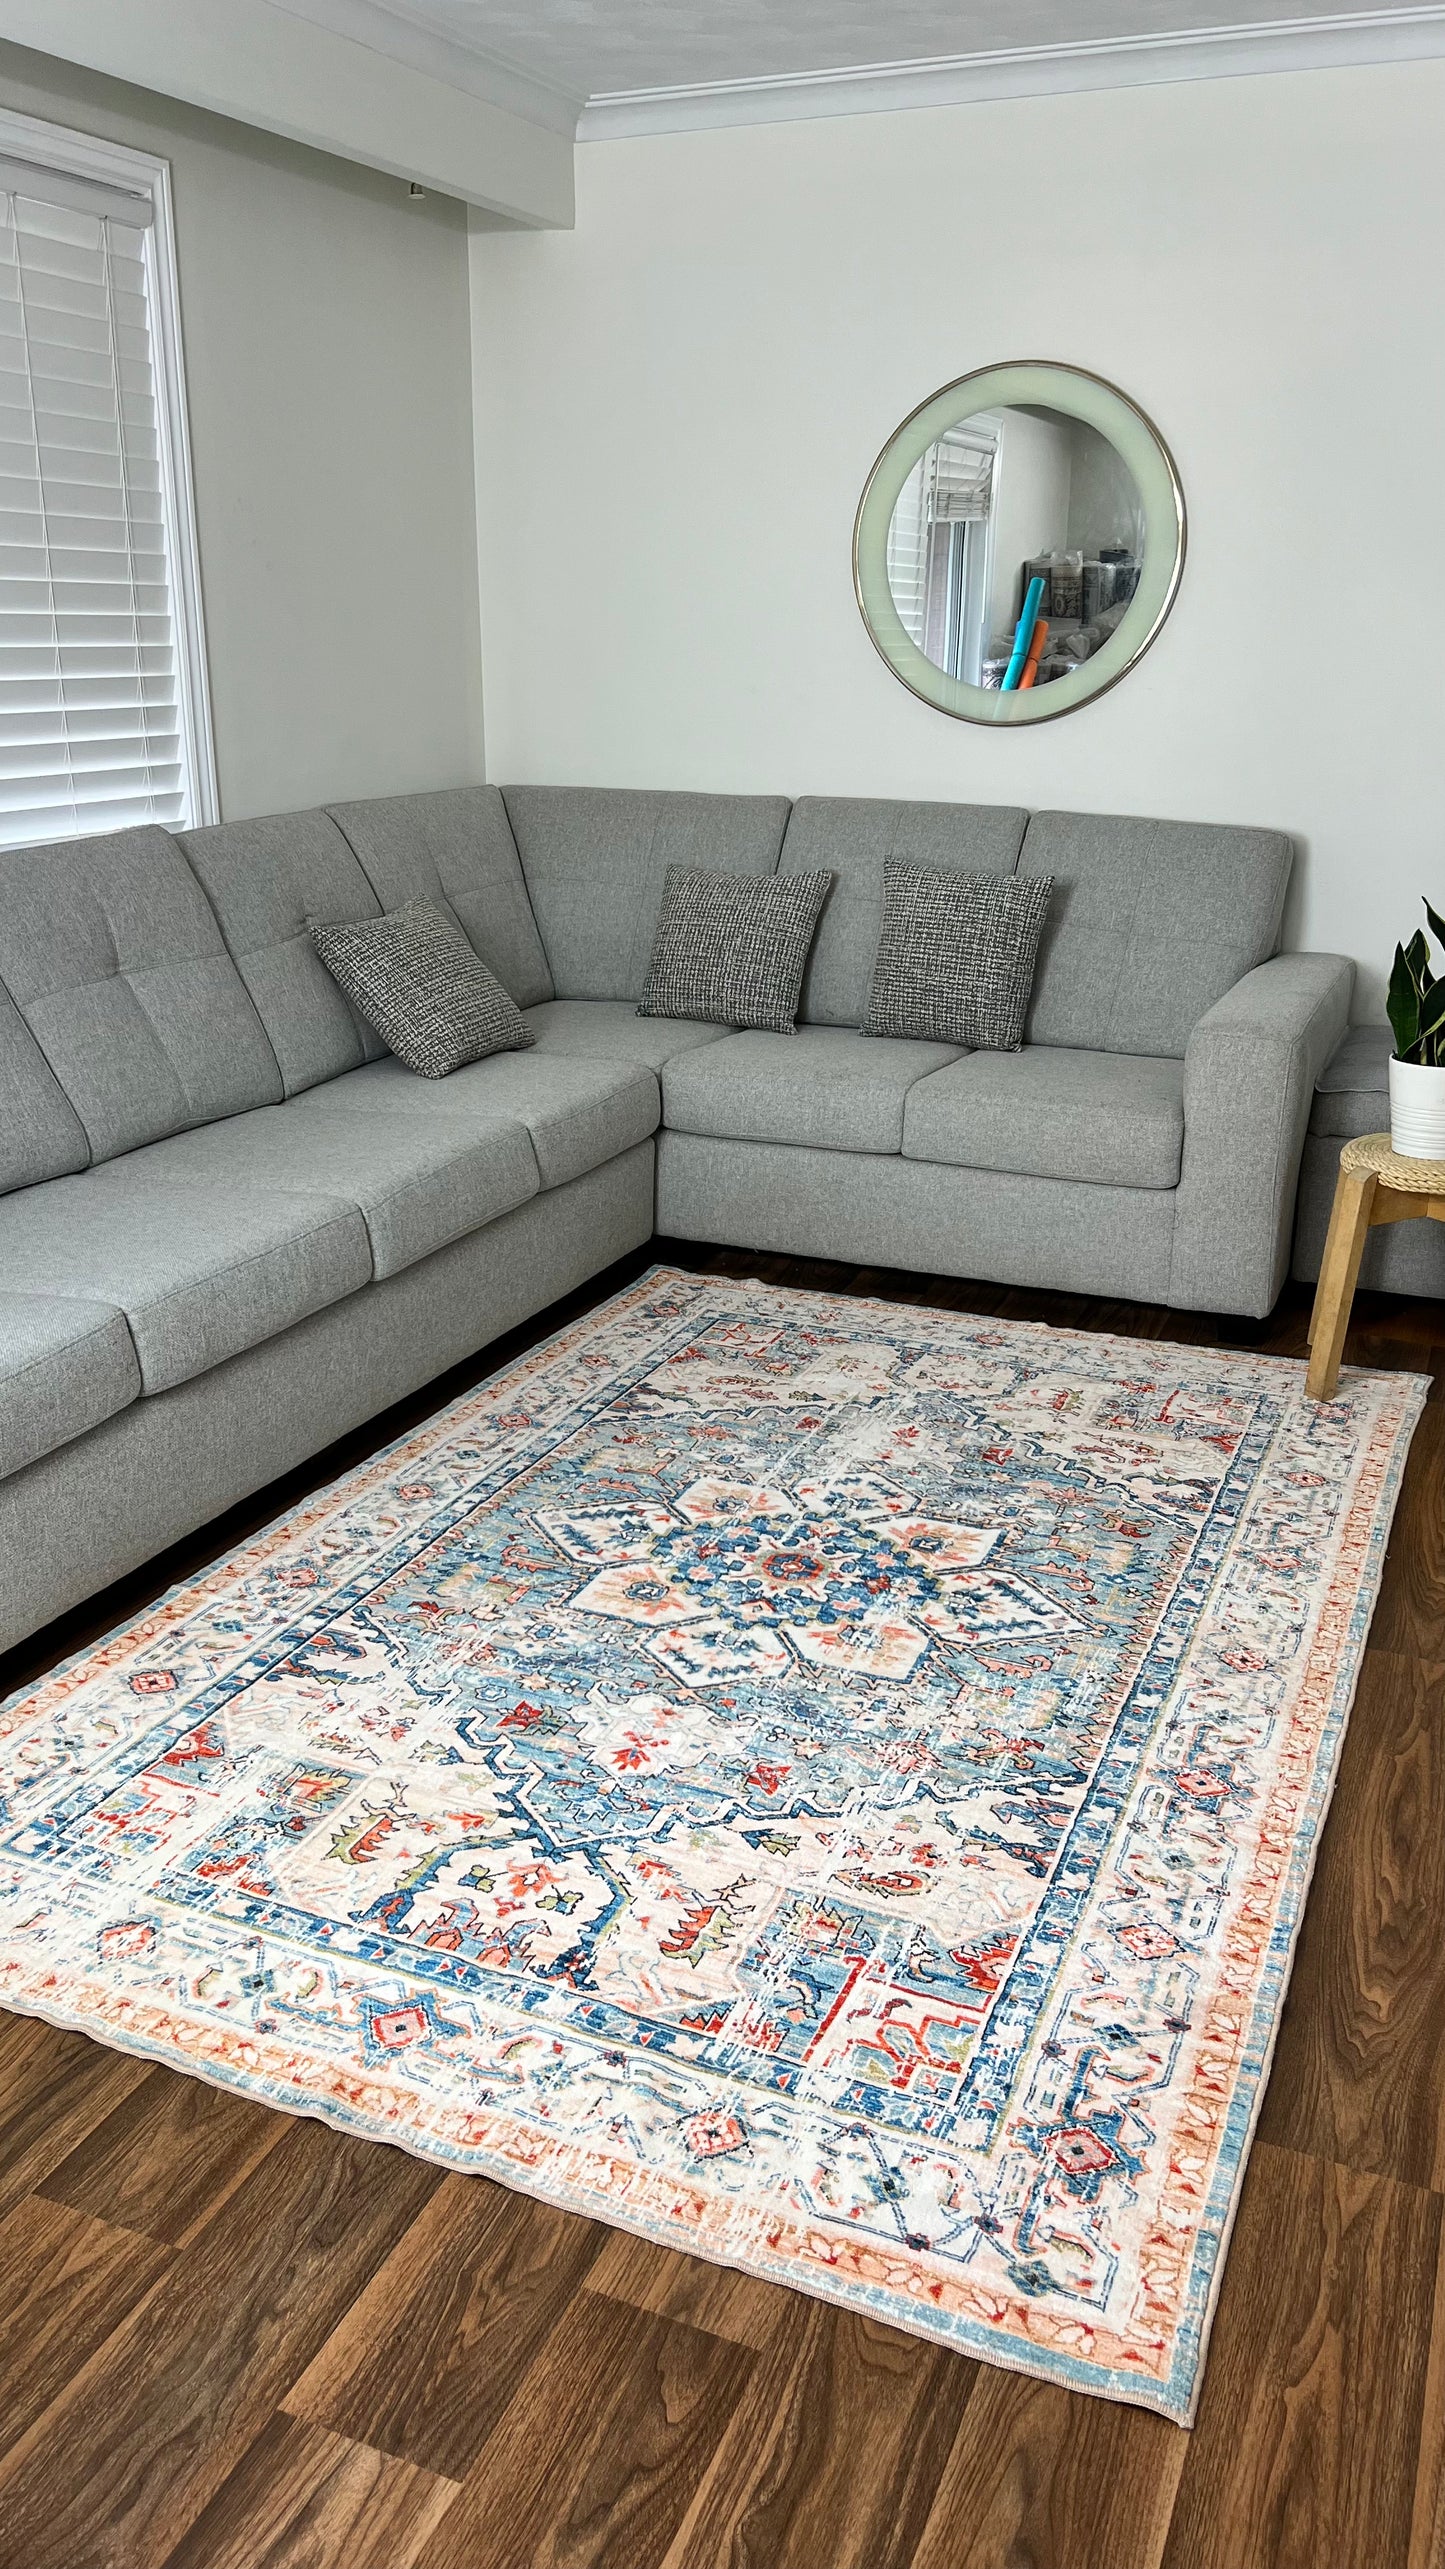 Convenience Meets Tradition: Explore Washable Persian Rugs